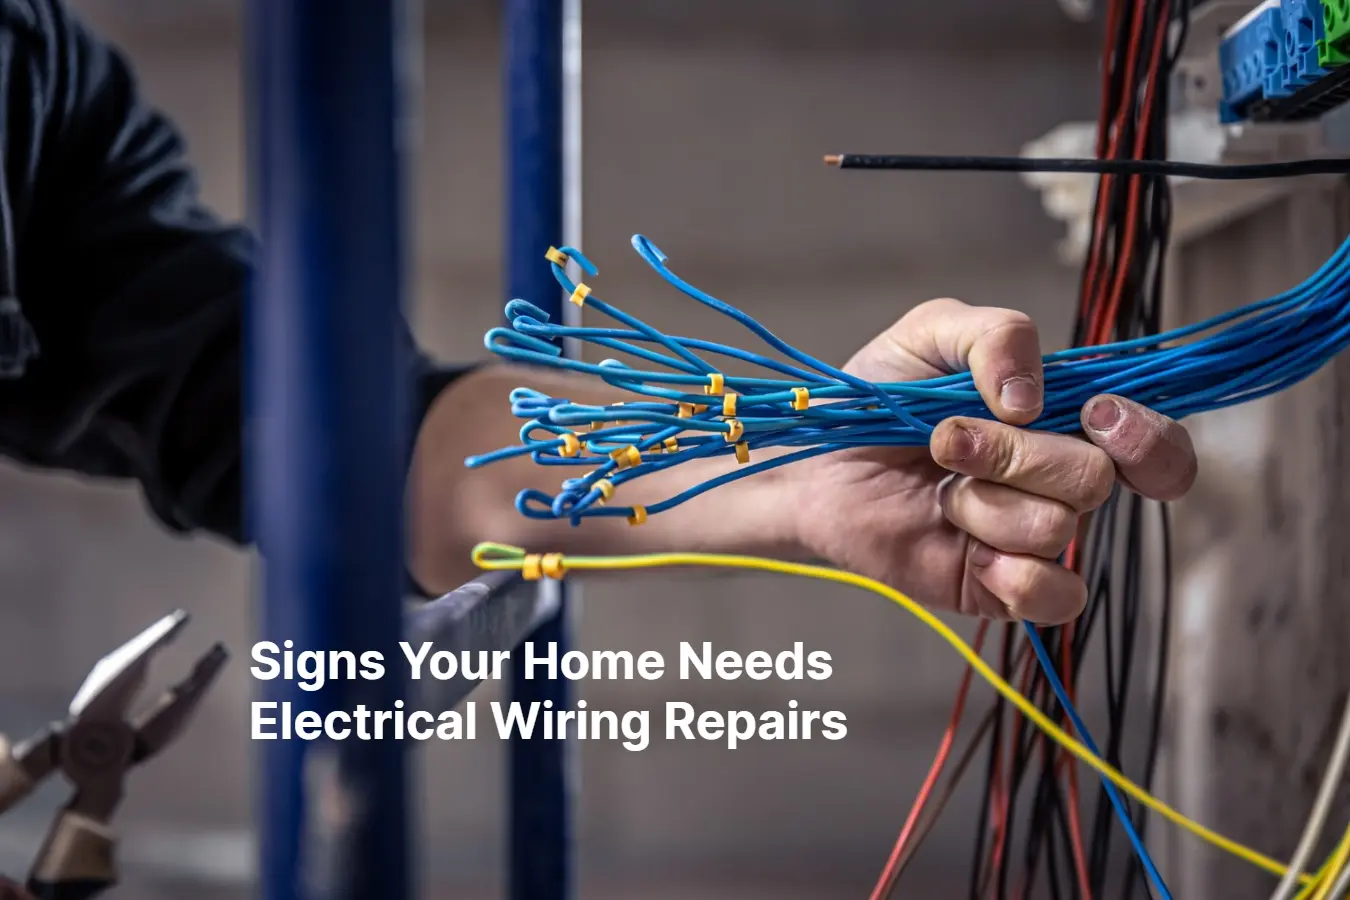 Signs Your Home Needs Electrical Wiring Repairs